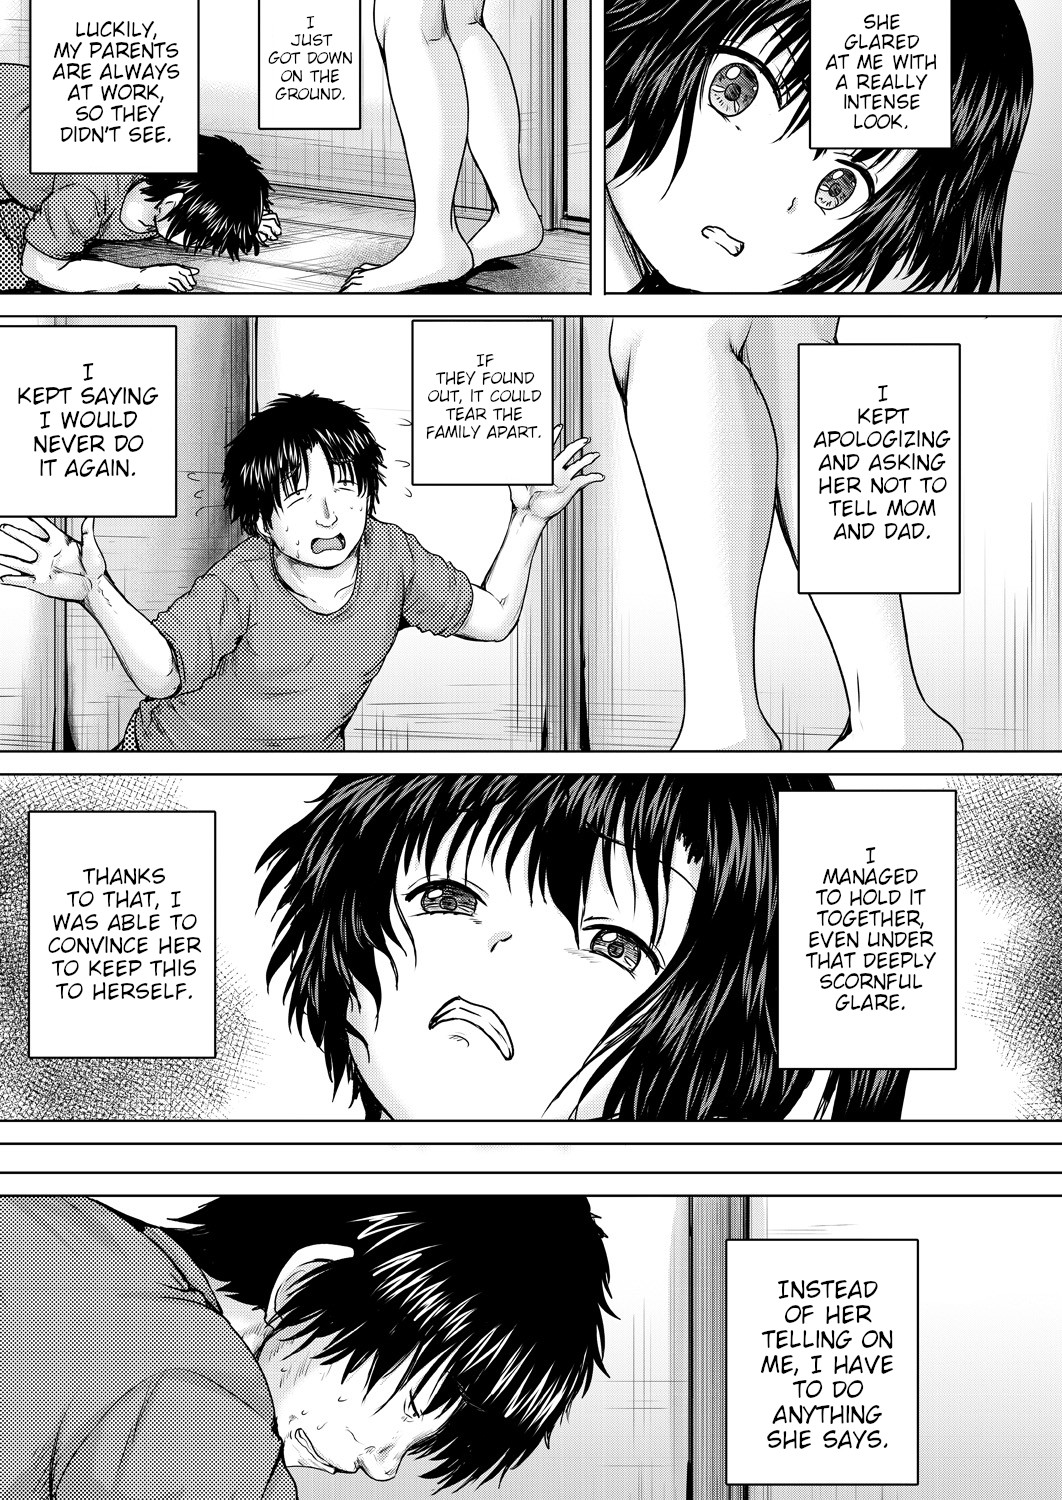 Hentai Manga Comic-Leave It To Onii-chan-Chapter 1-4-5